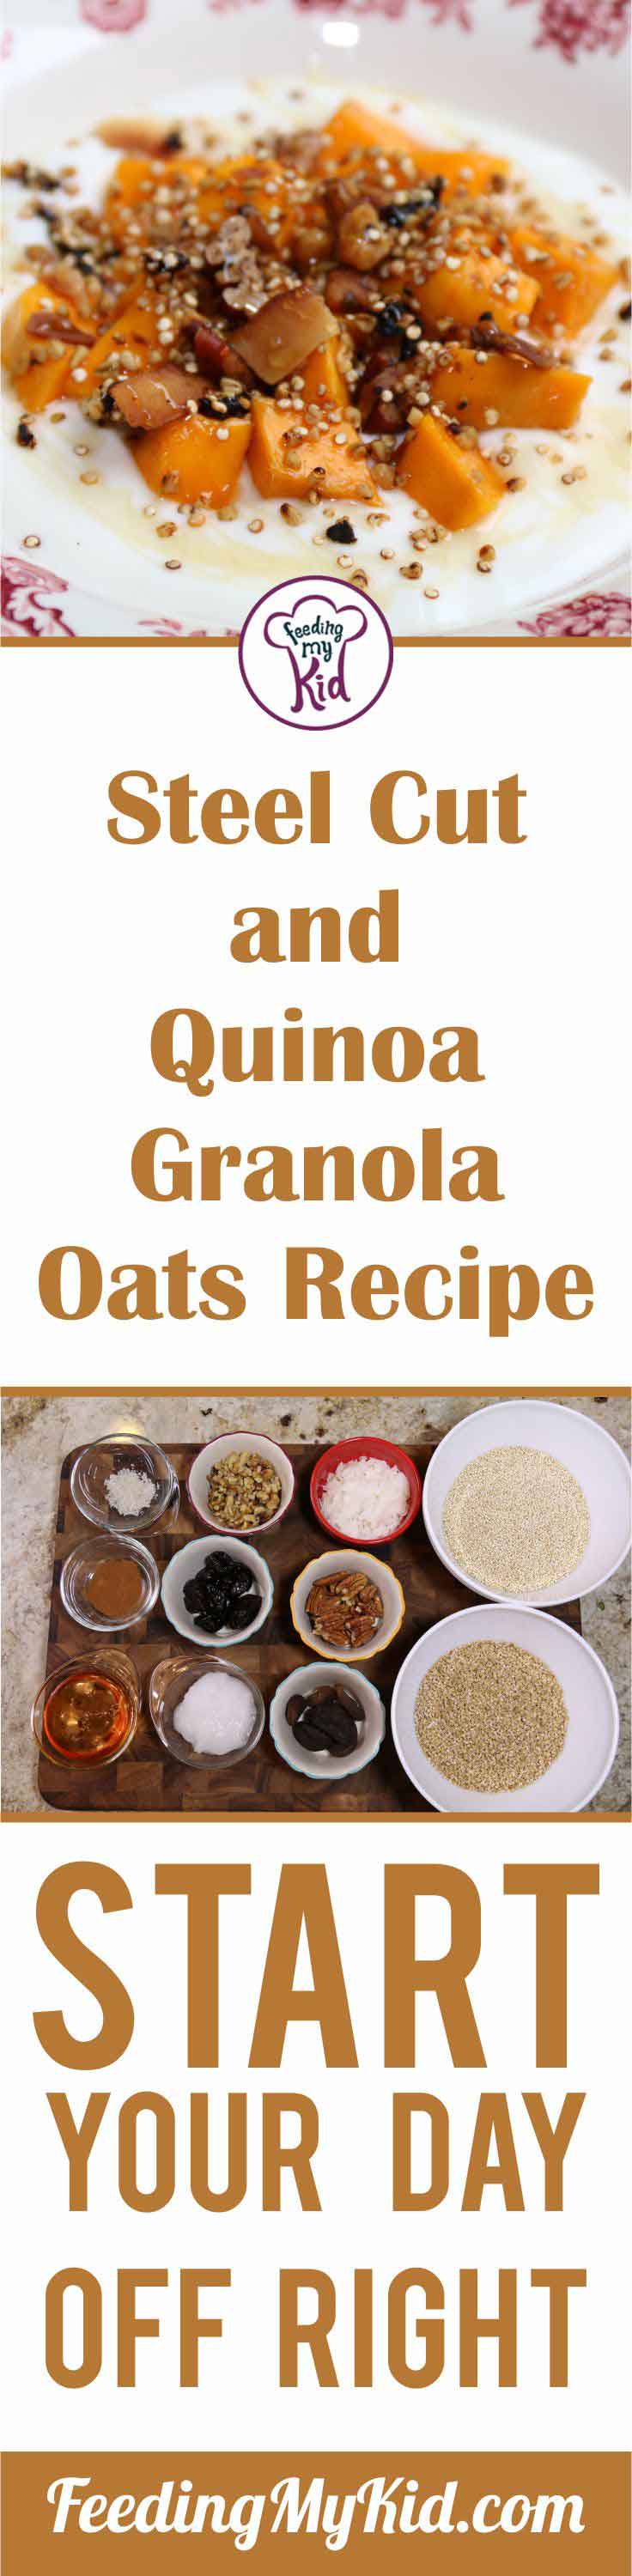 This healthy granola recipe has a ton of fiber, no preservatives, and you can likely find all of these ingredients in your pantry.